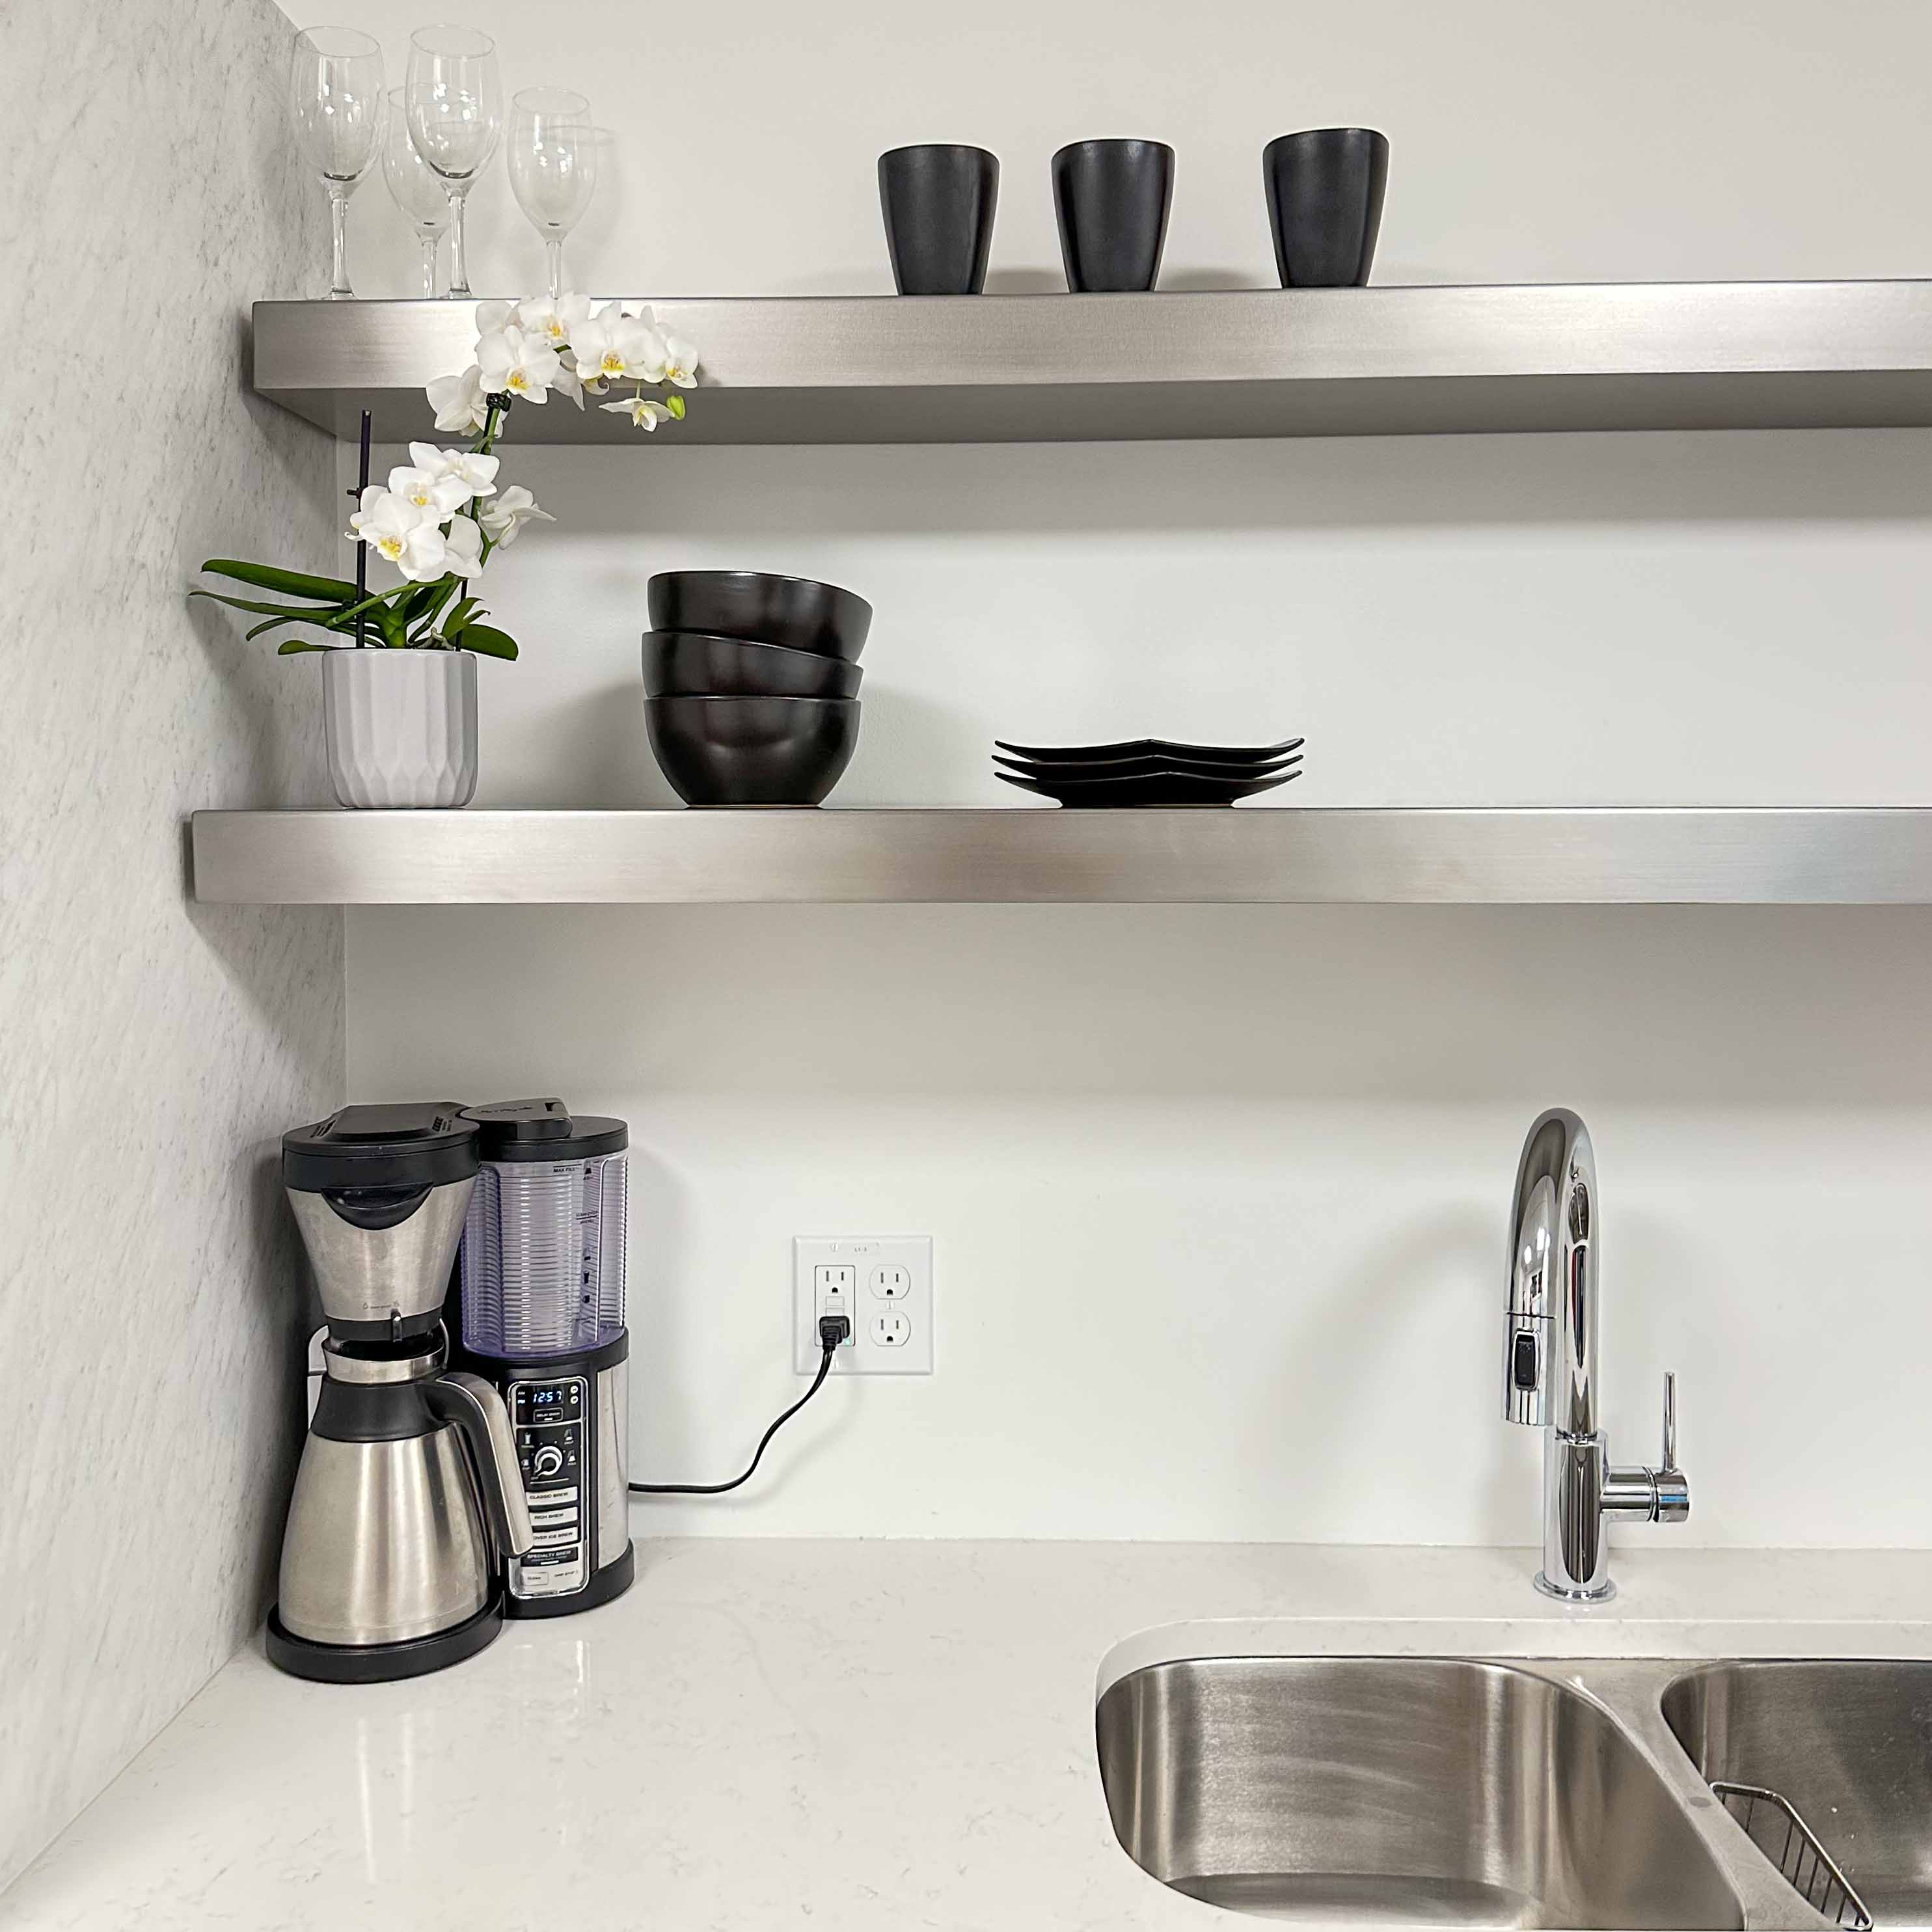 Stainless Steel Floating Shelf 10 Deep for Kitchen, Bathroom and